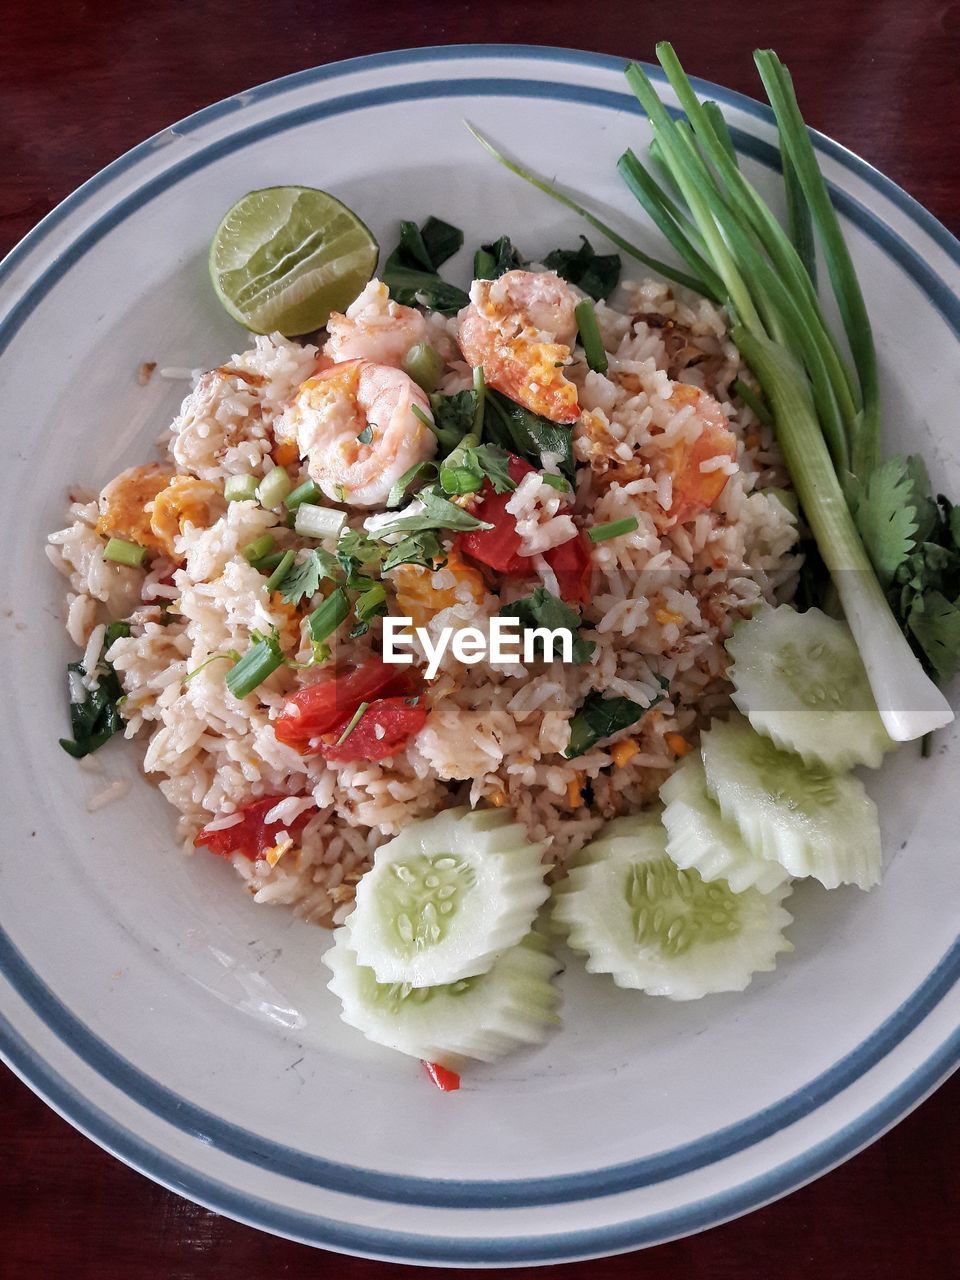 Fried rice with shimp is delicious thaifood and often eaten